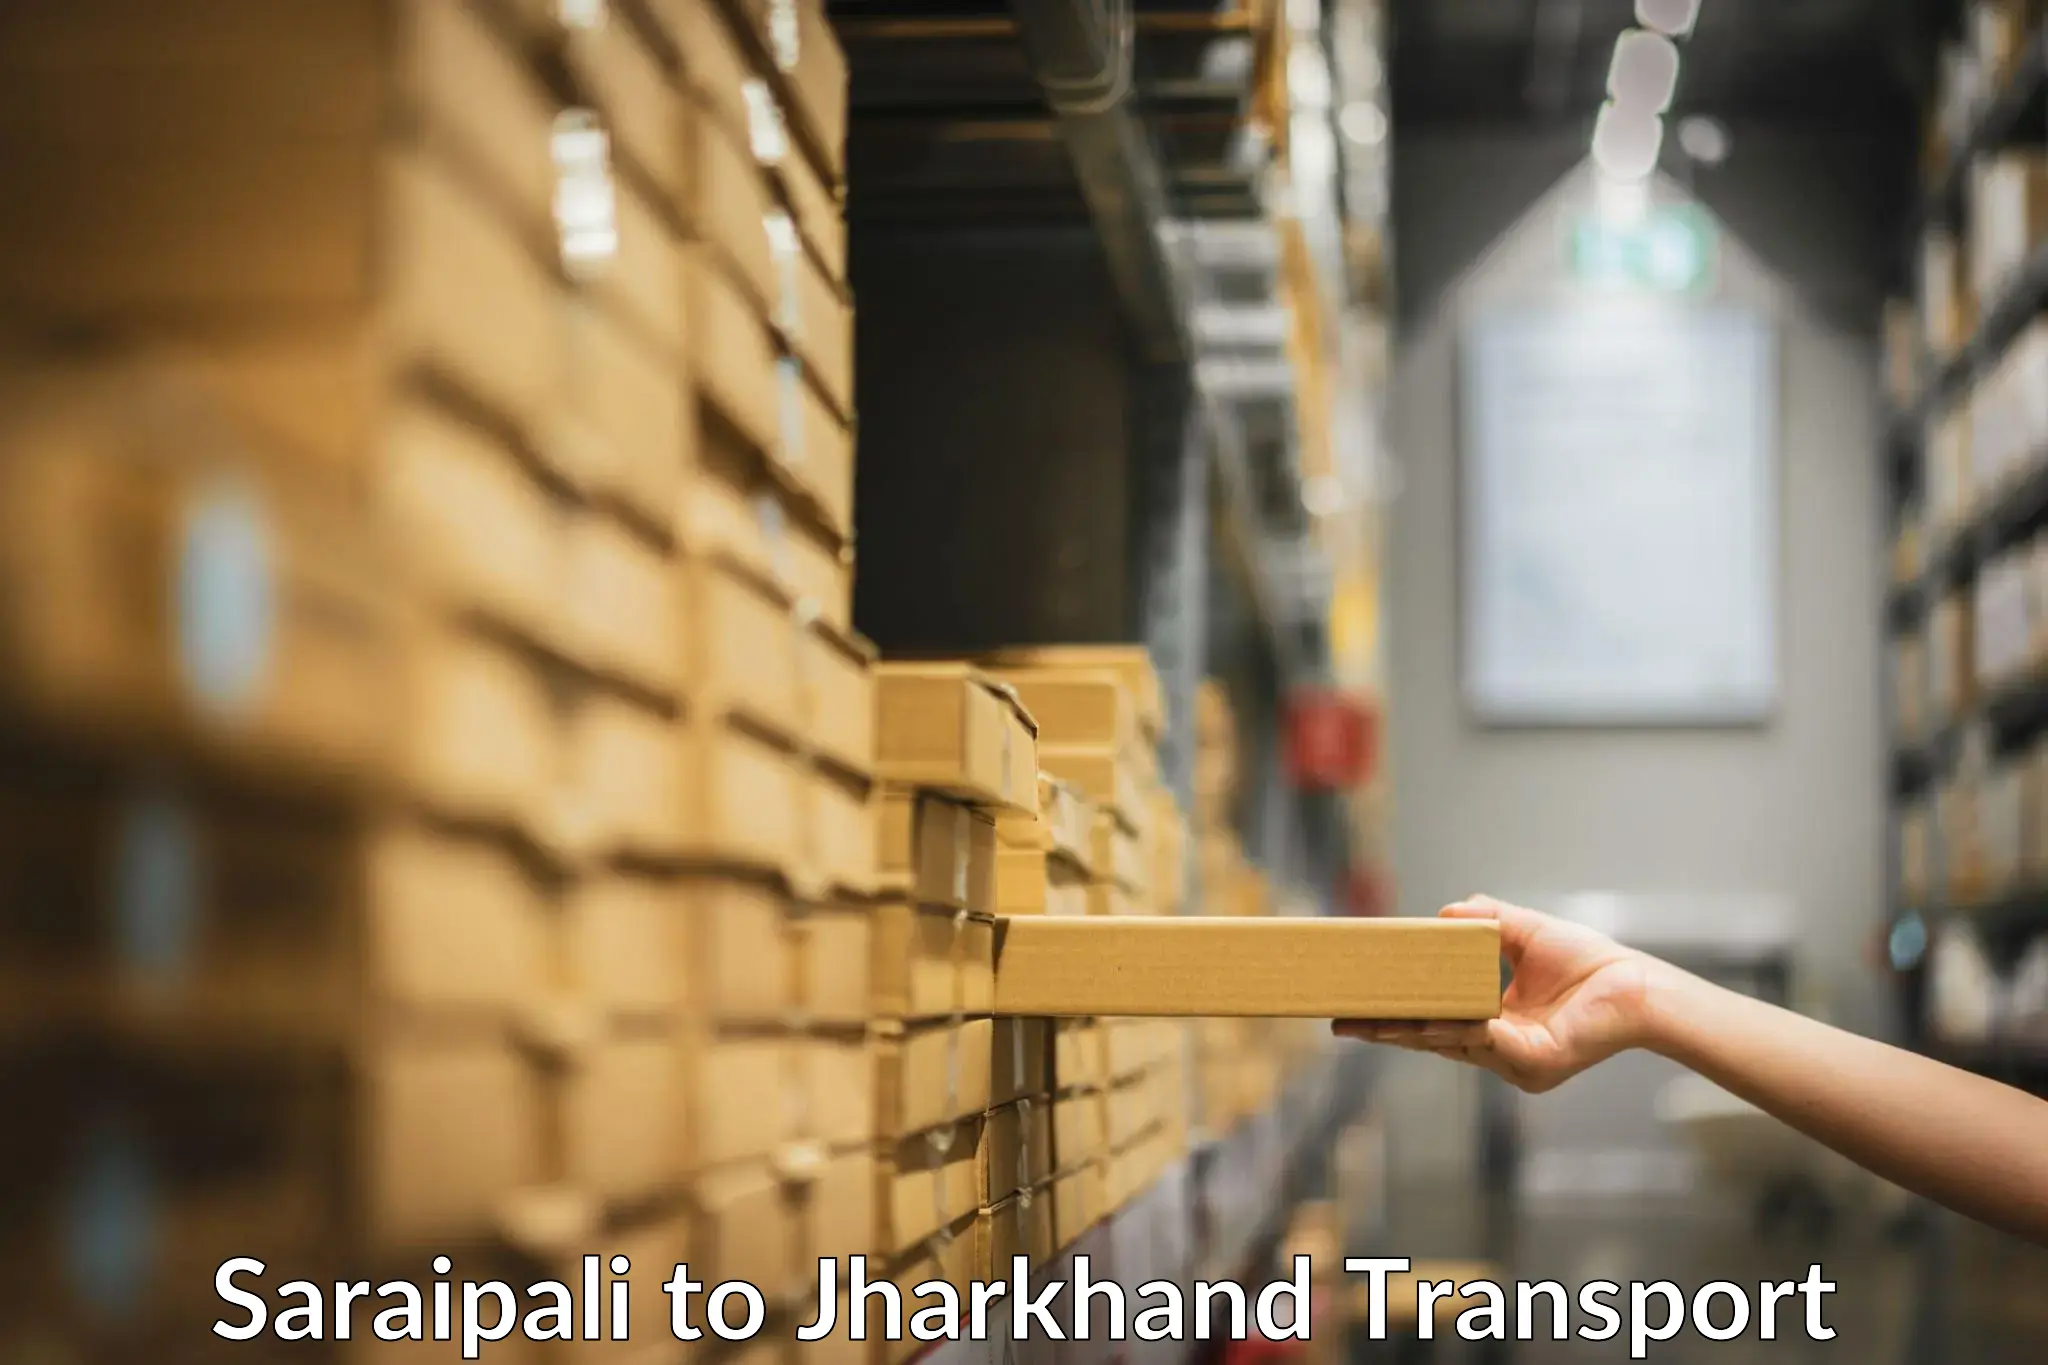 Commercial transport service Saraipali to Jharkhand